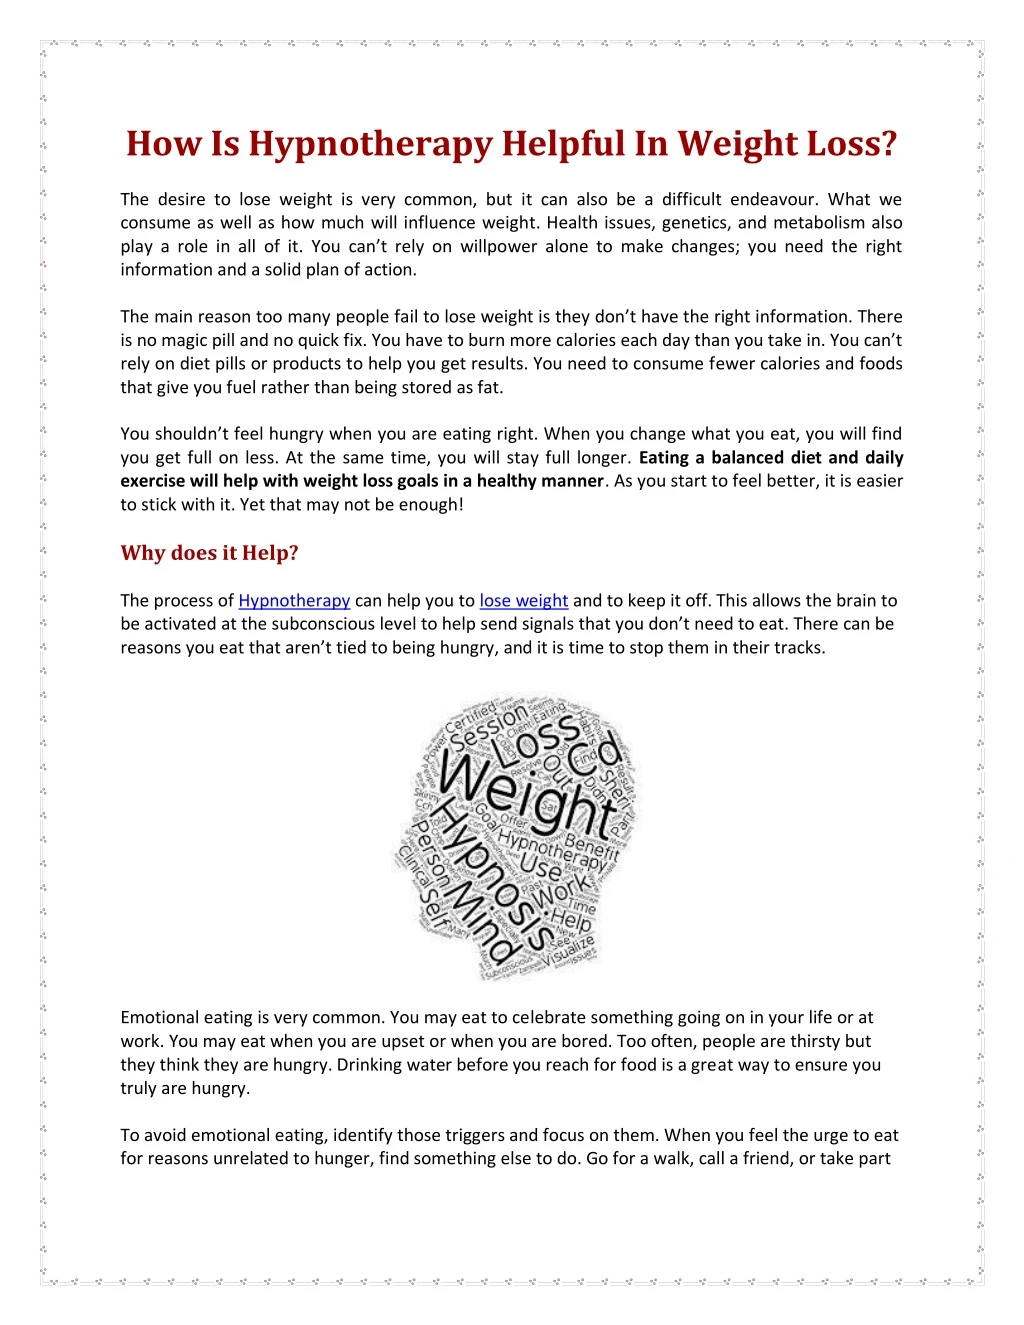 how is hypnotherapy helpful in weight loss